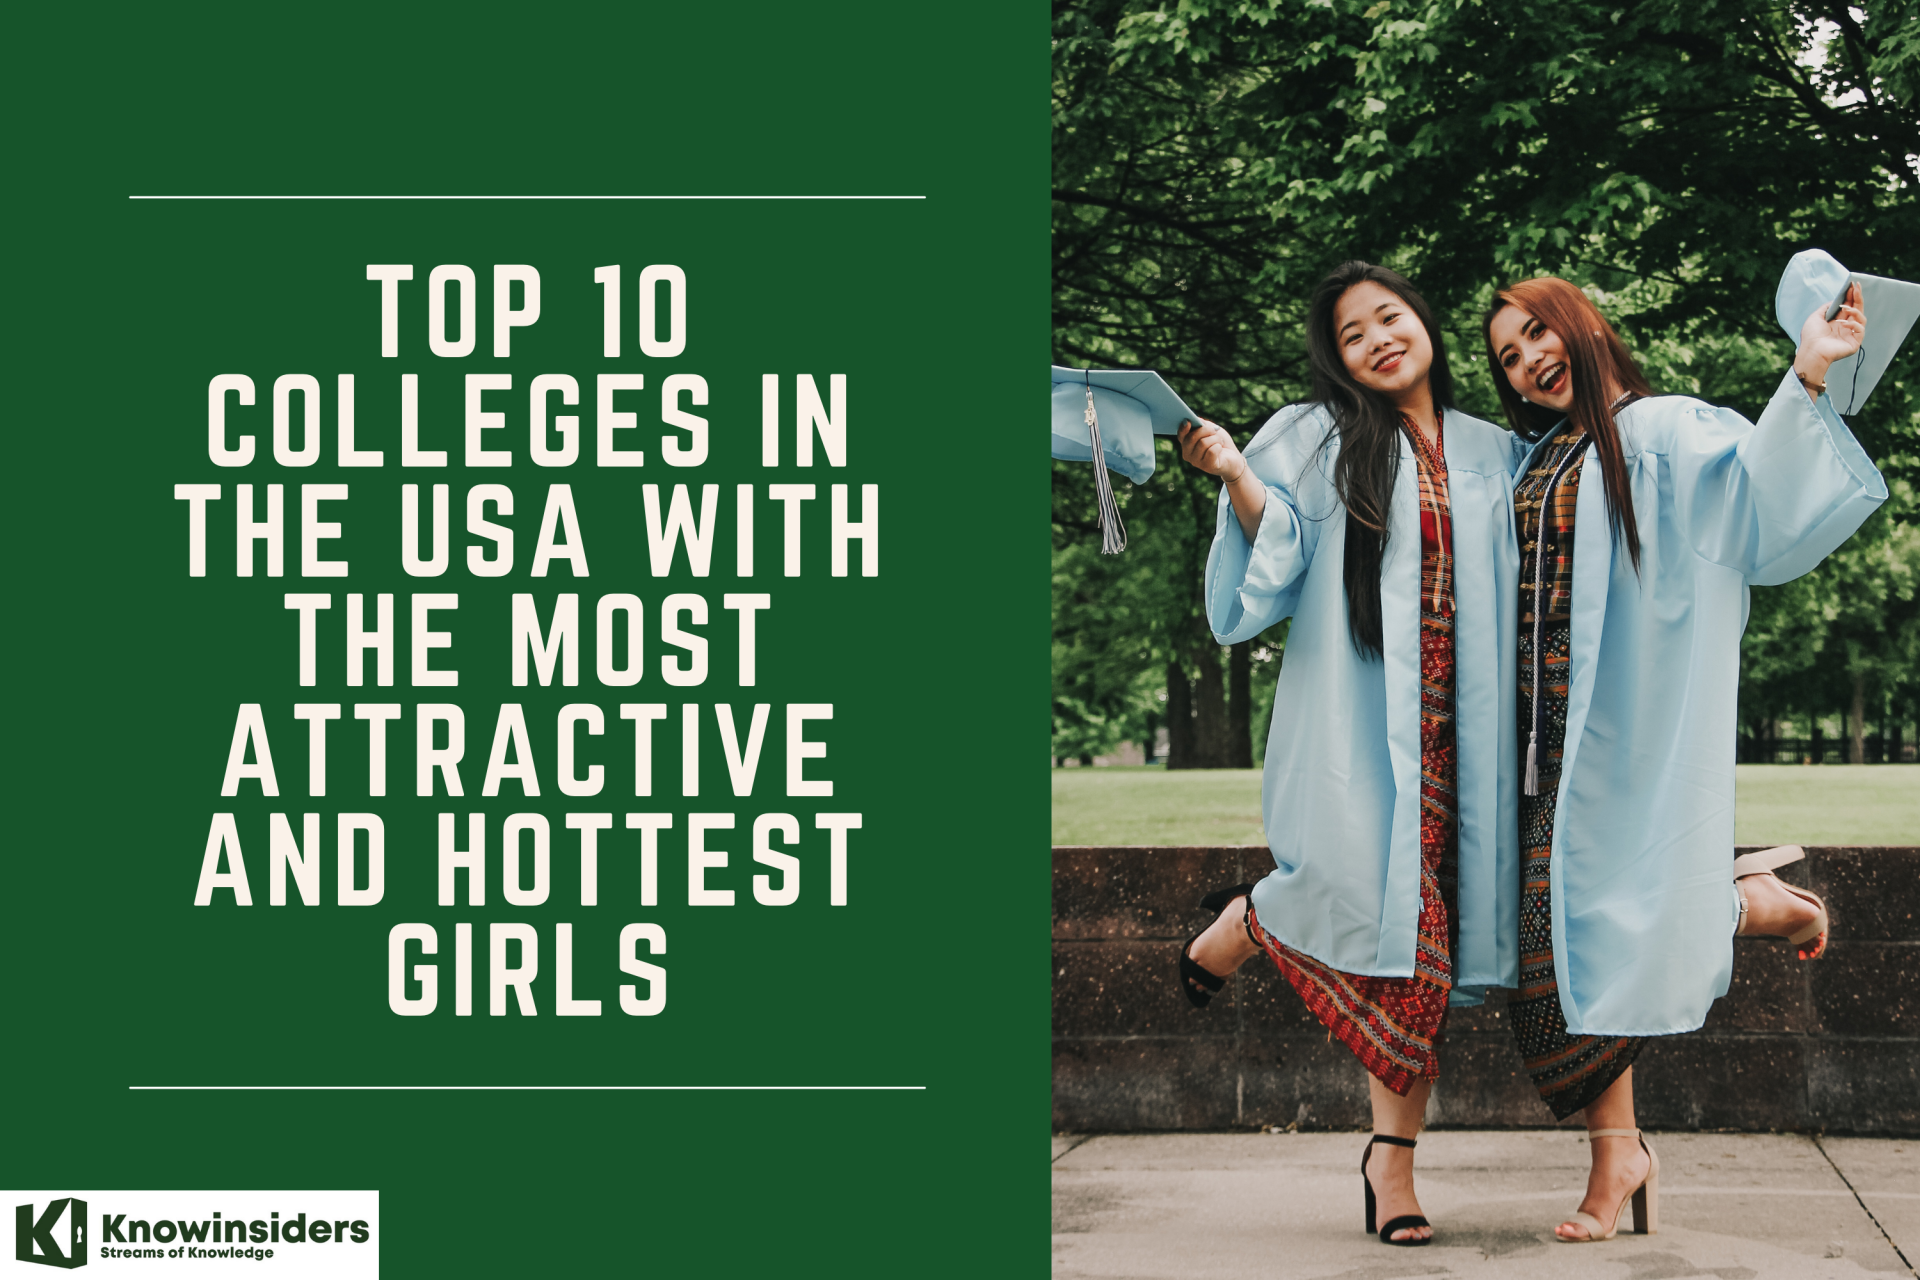 Top 10 Colleges in the USA With the Most Attractive and Hottest Girls